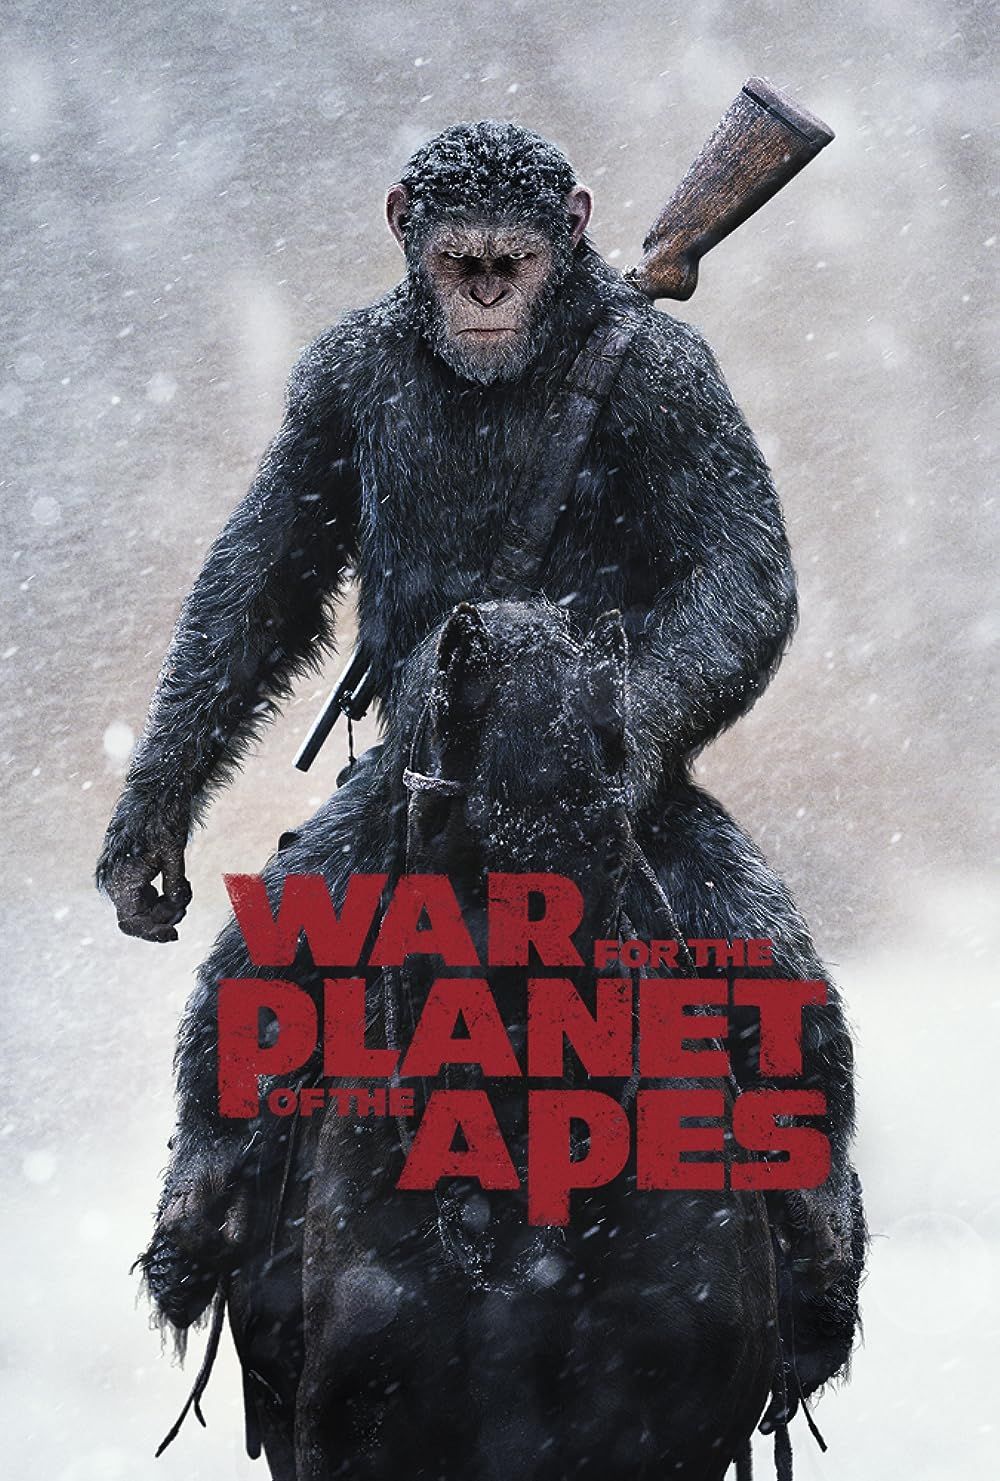 Caesar rides a horse while it snows in War For The Planet Of The Apes poster.